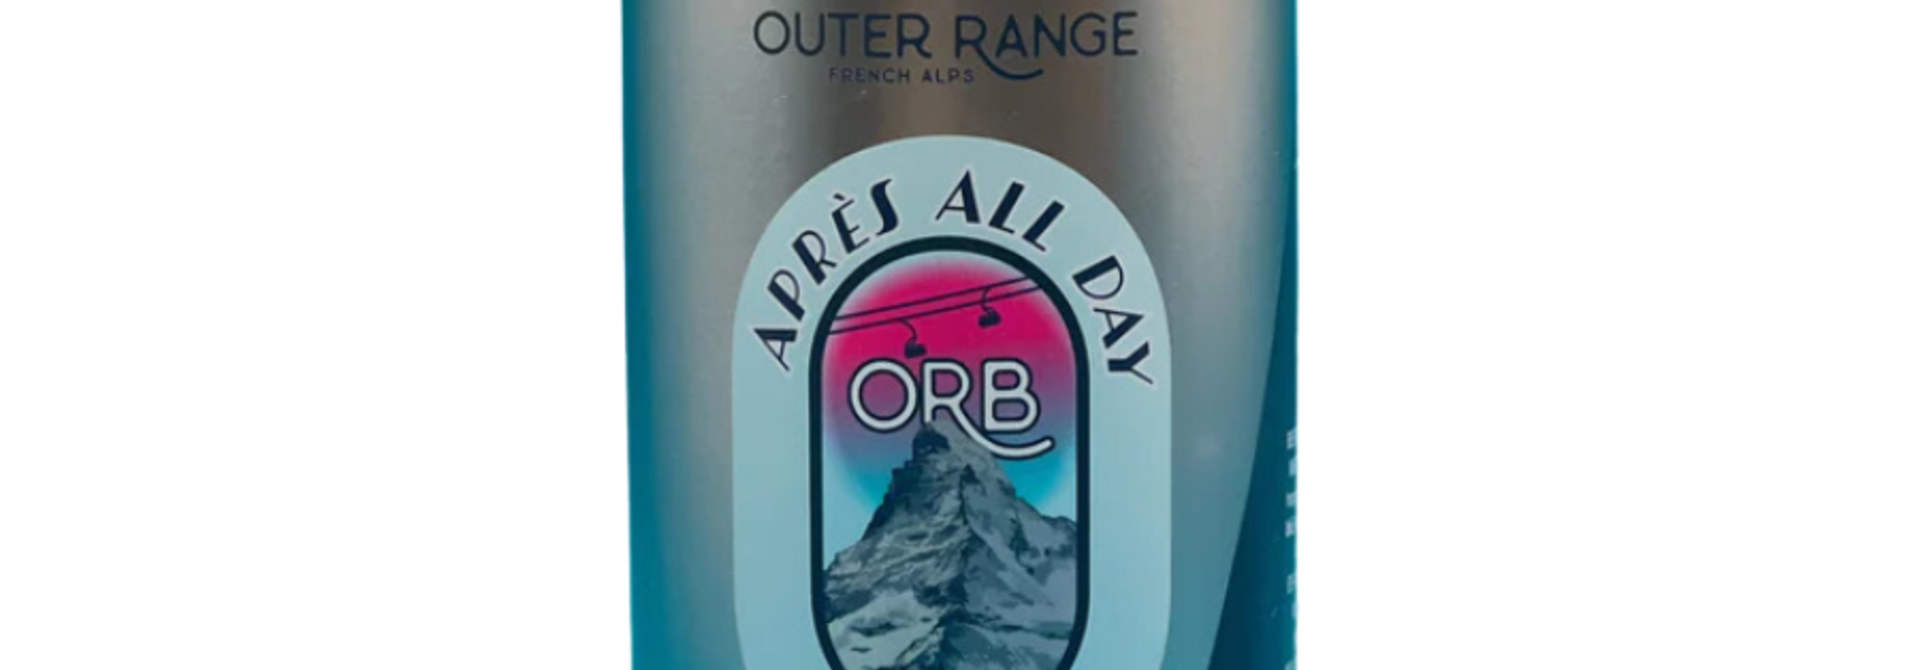 Outer Range French Alps Apres All Day 44CL 4,4%